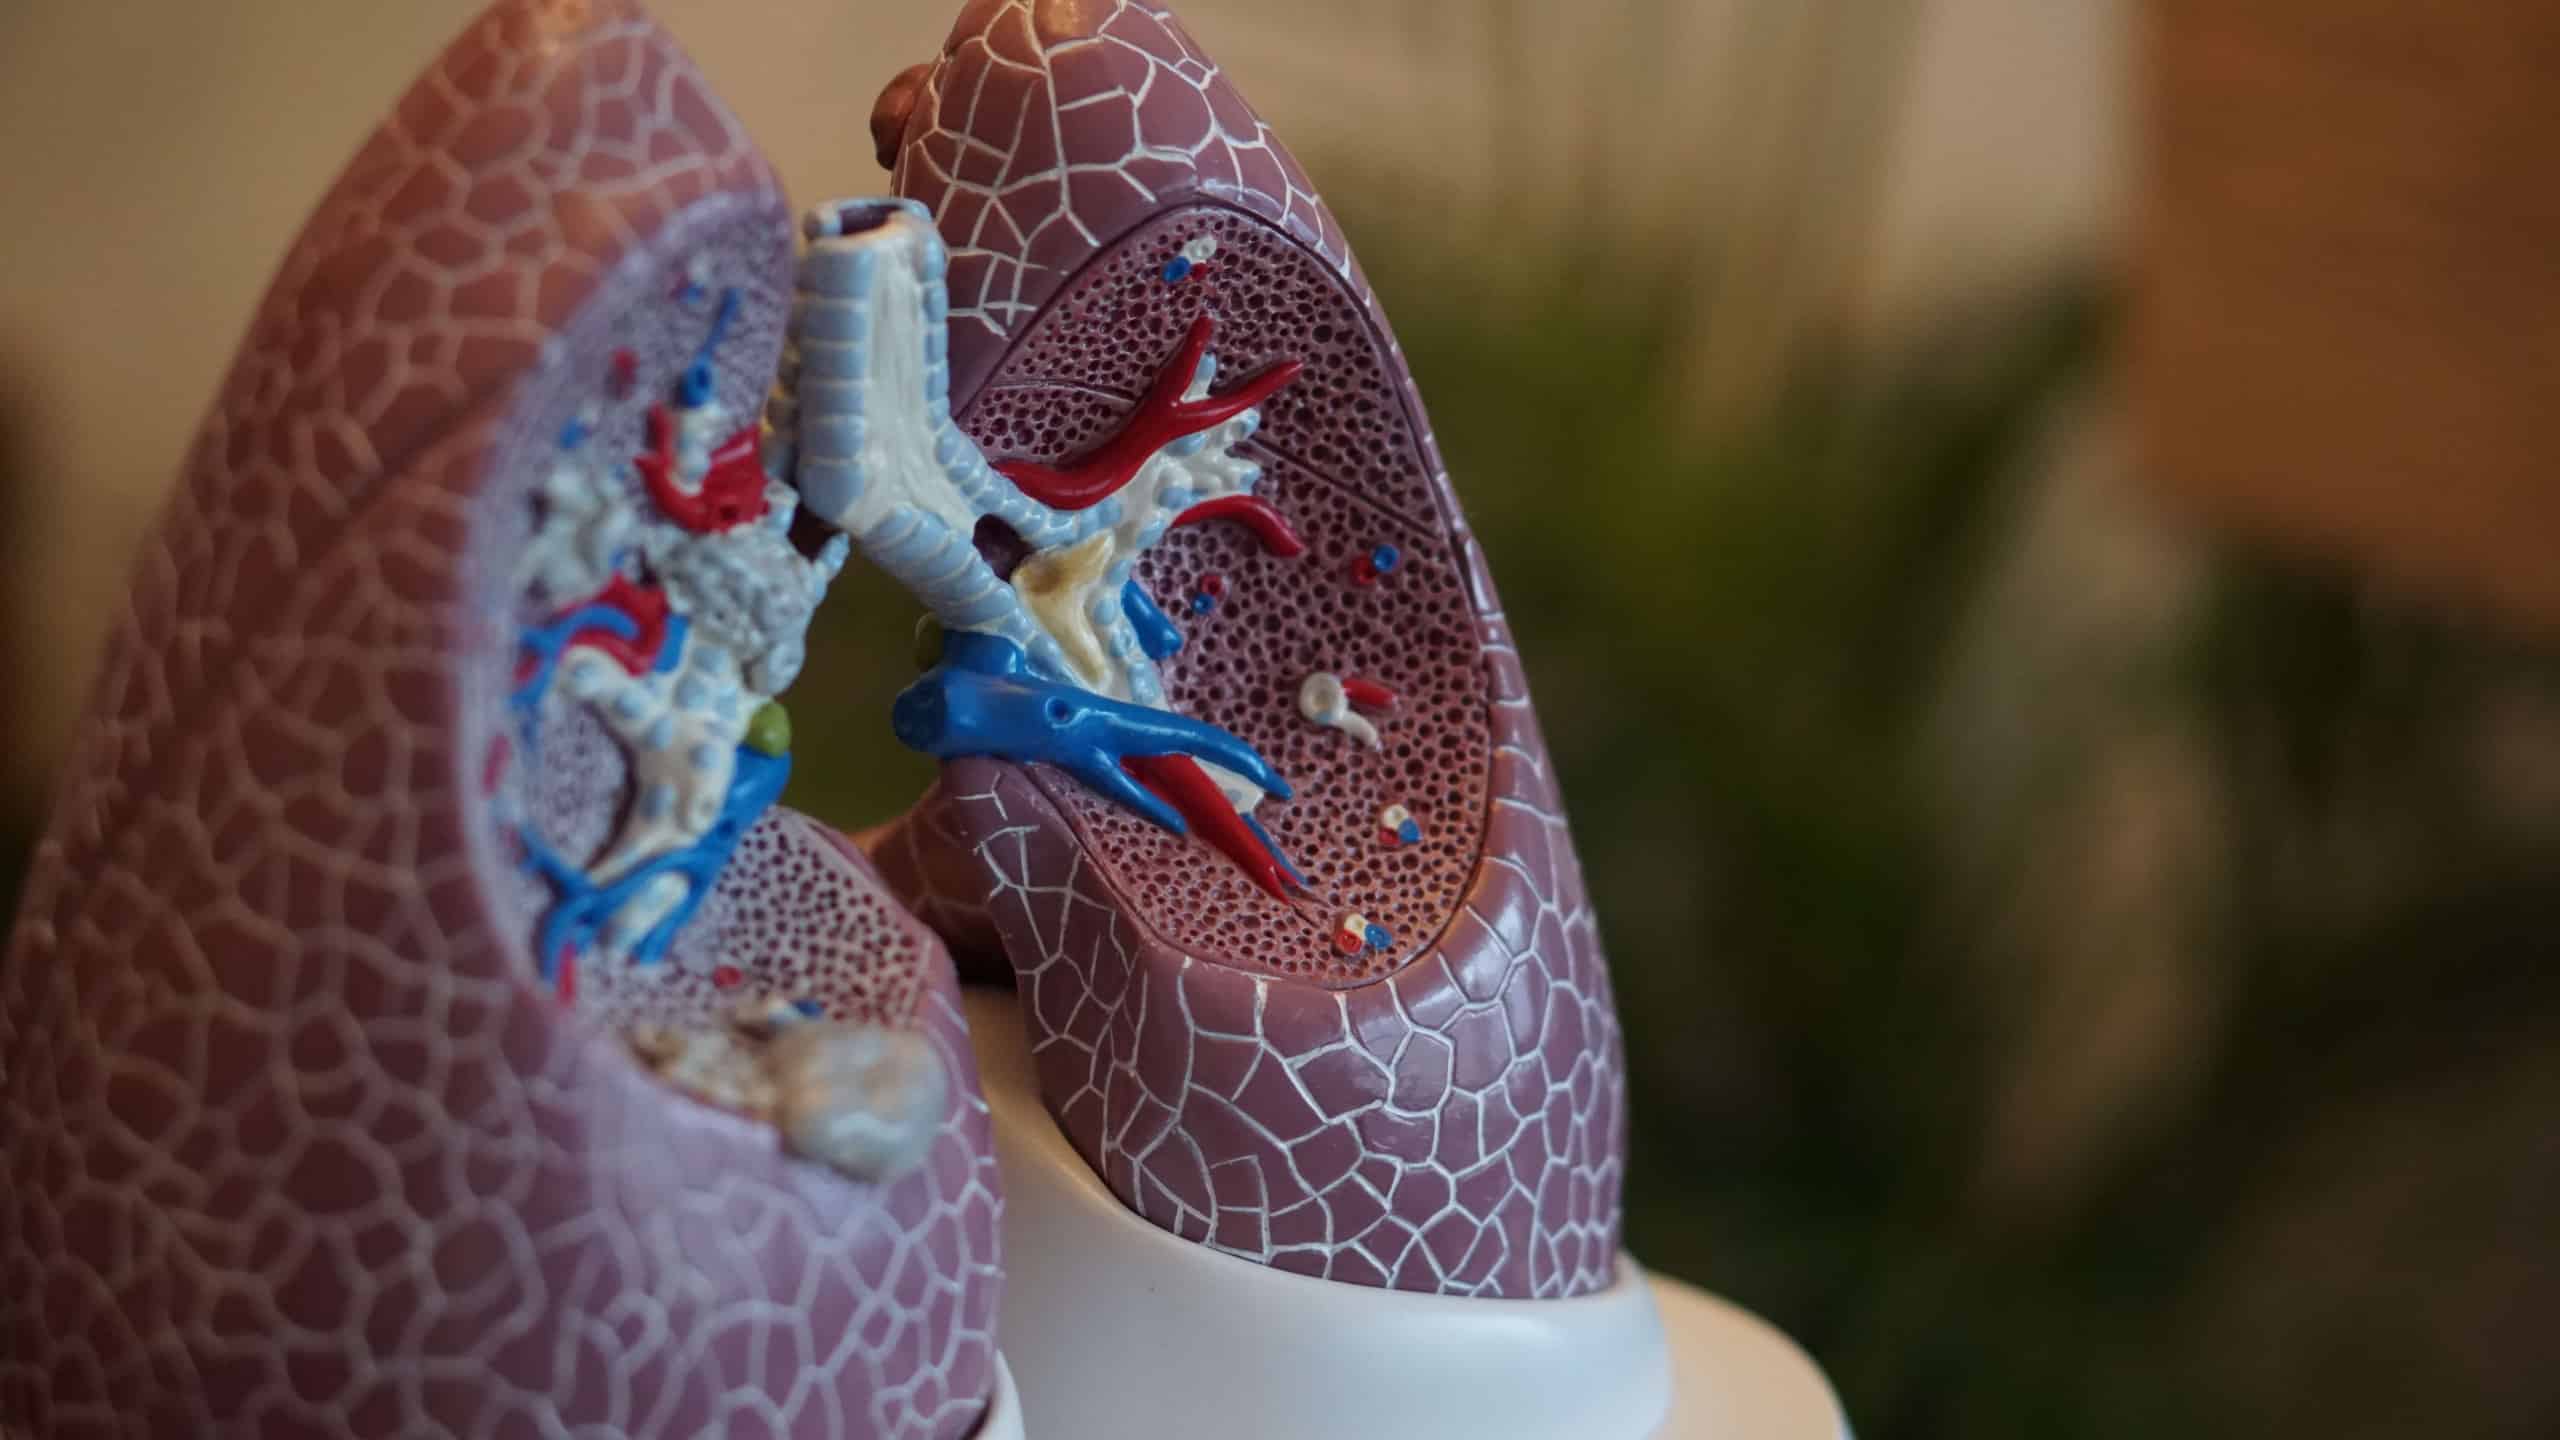 COPD, lung cancer